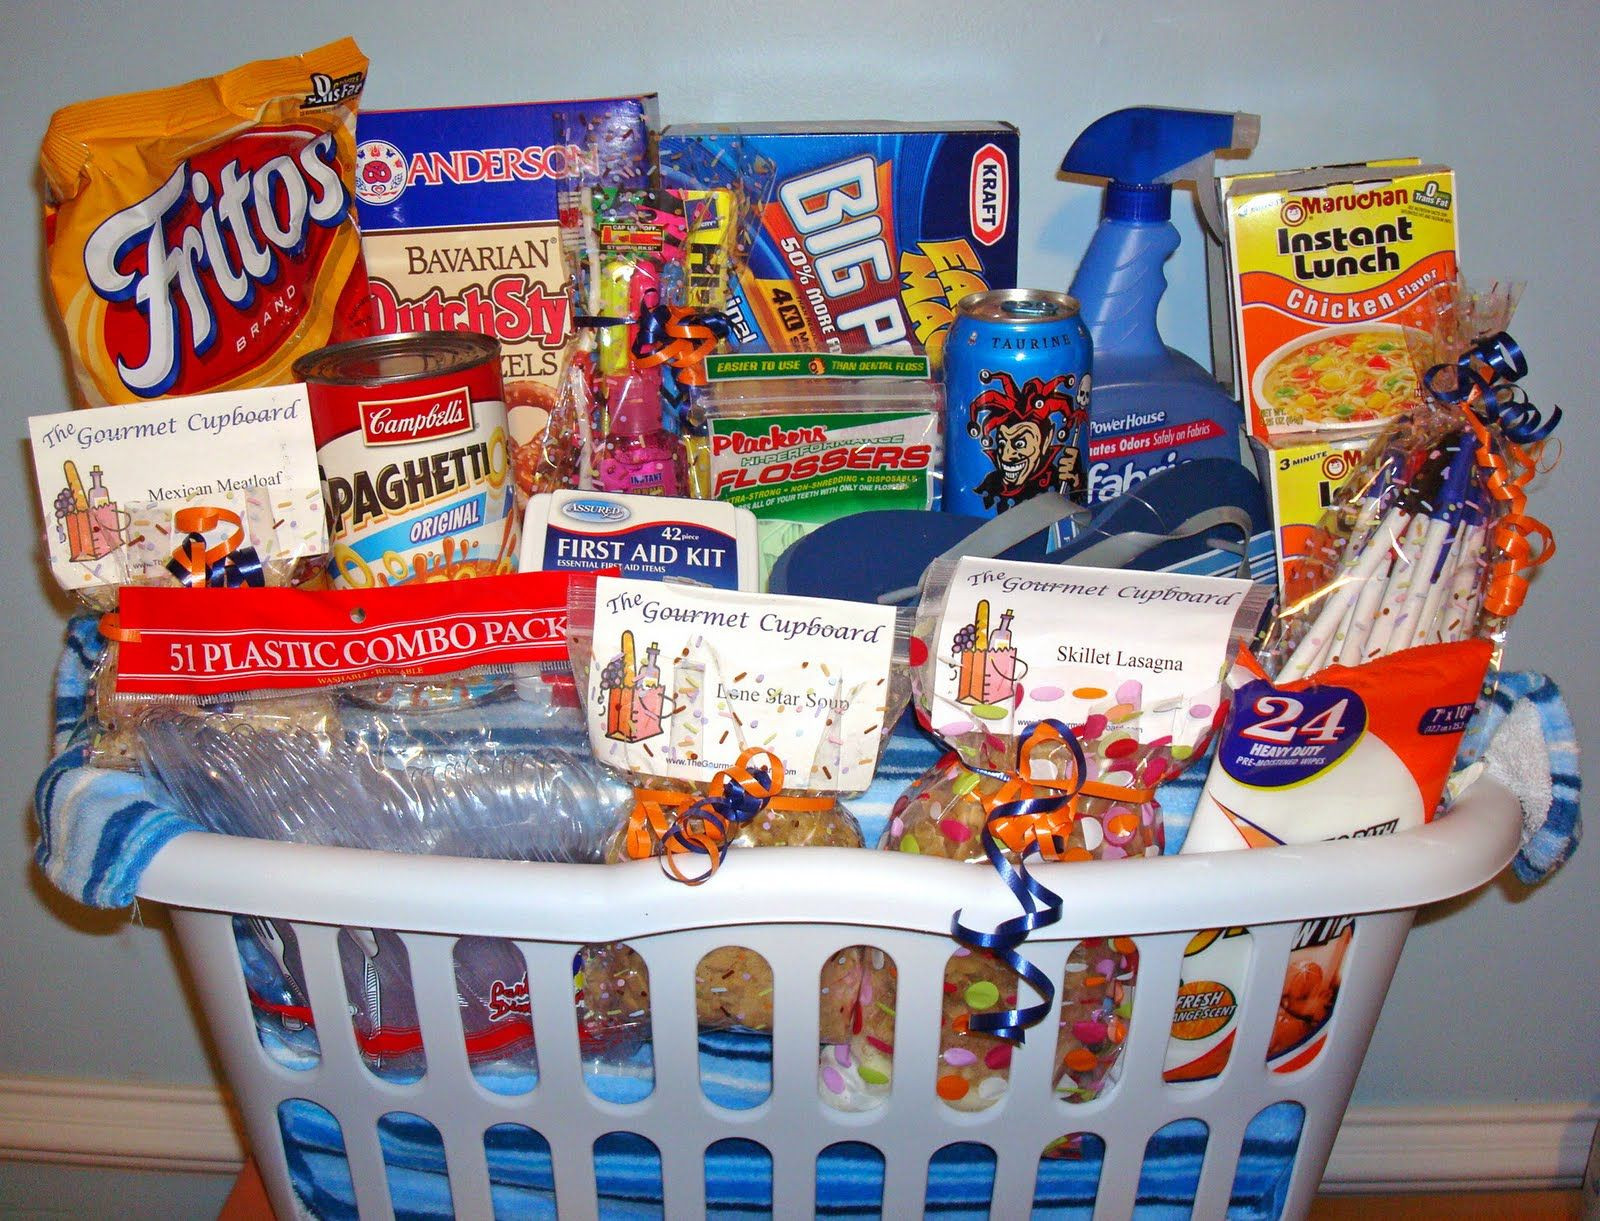 Graduation Gift Ideas For Older Adults
 dorm survival kit for graduating seniors I made this for